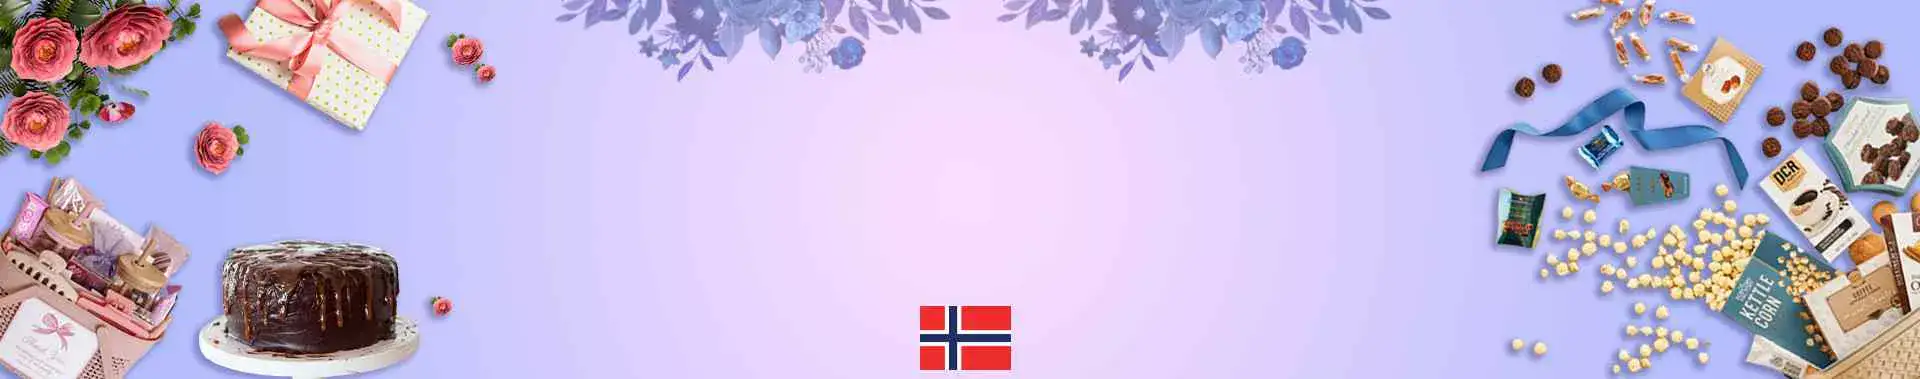 Send Gifts to Norway, Gift Baskets to Norway, Hampers to Norway, Hampers & Gifts delivery in Norway Online